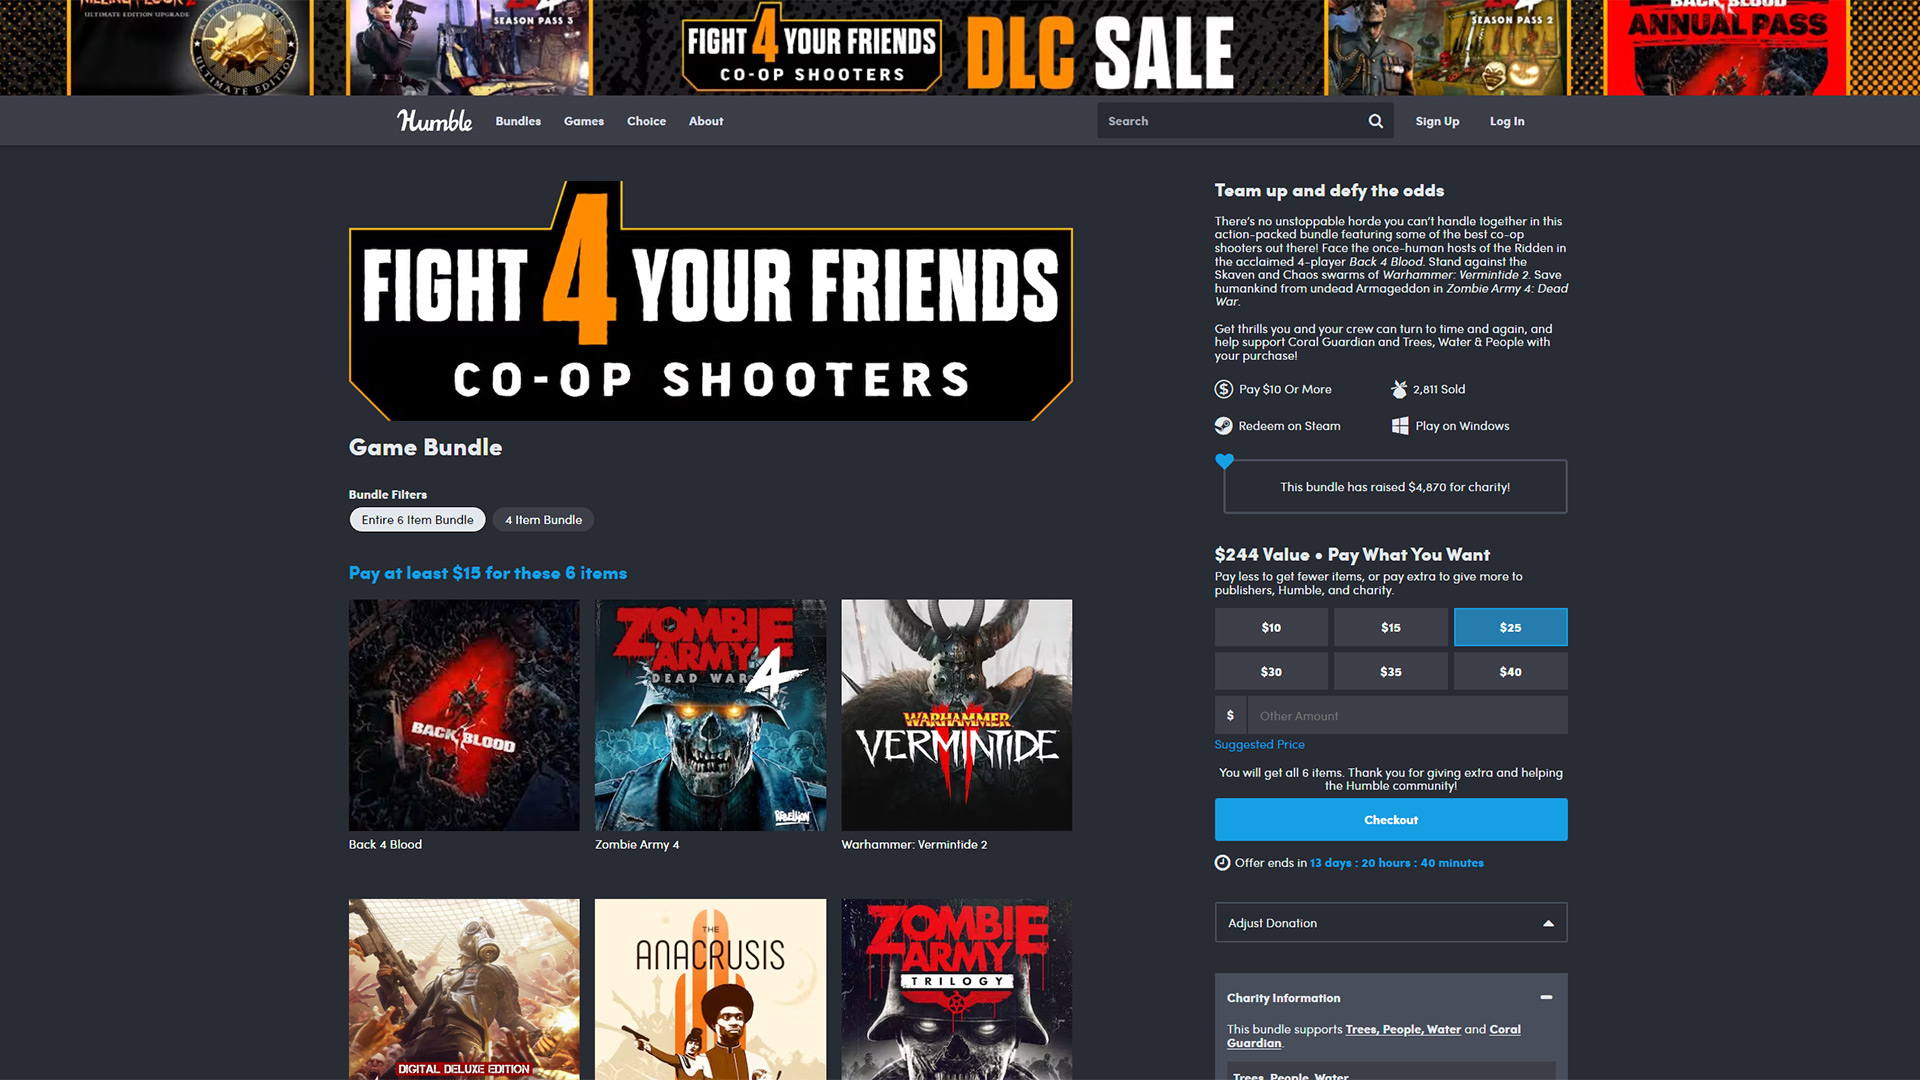 Fight 4 Your Friends Co-op Shooters Humble Bundle